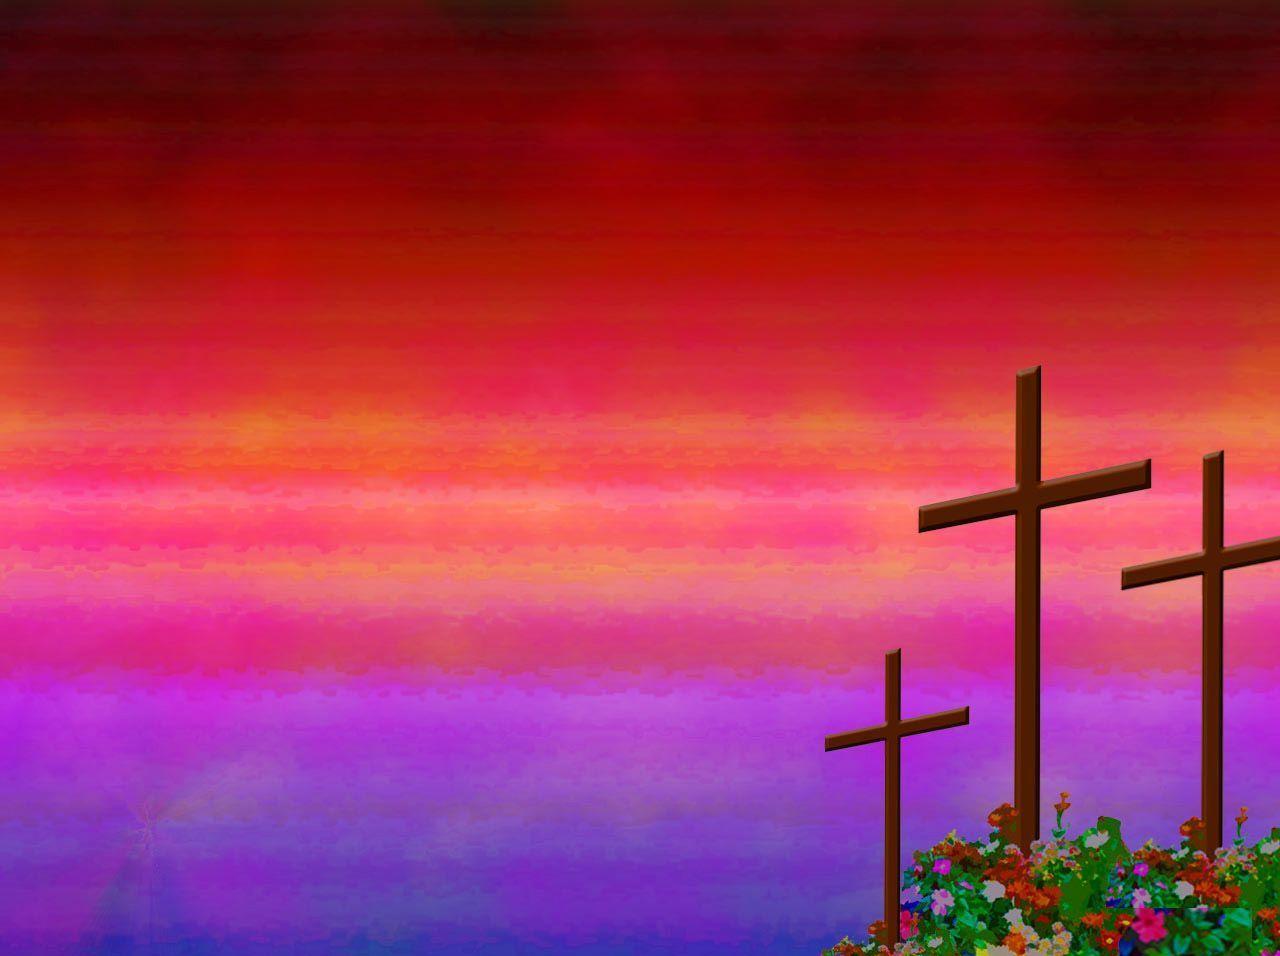 Wallpaper For > Christian Background For Powerpoint Gif